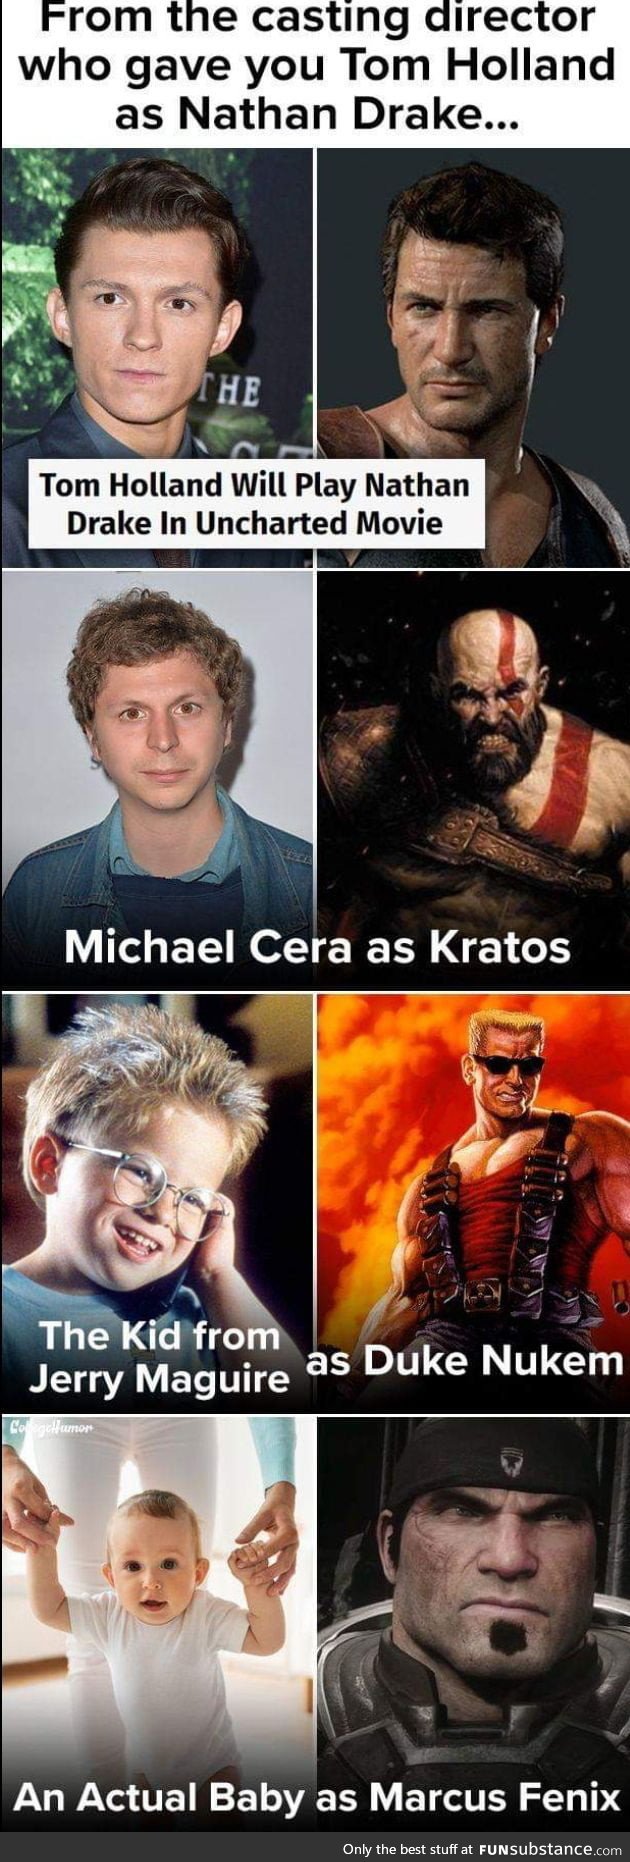 They got me at Michael Cera